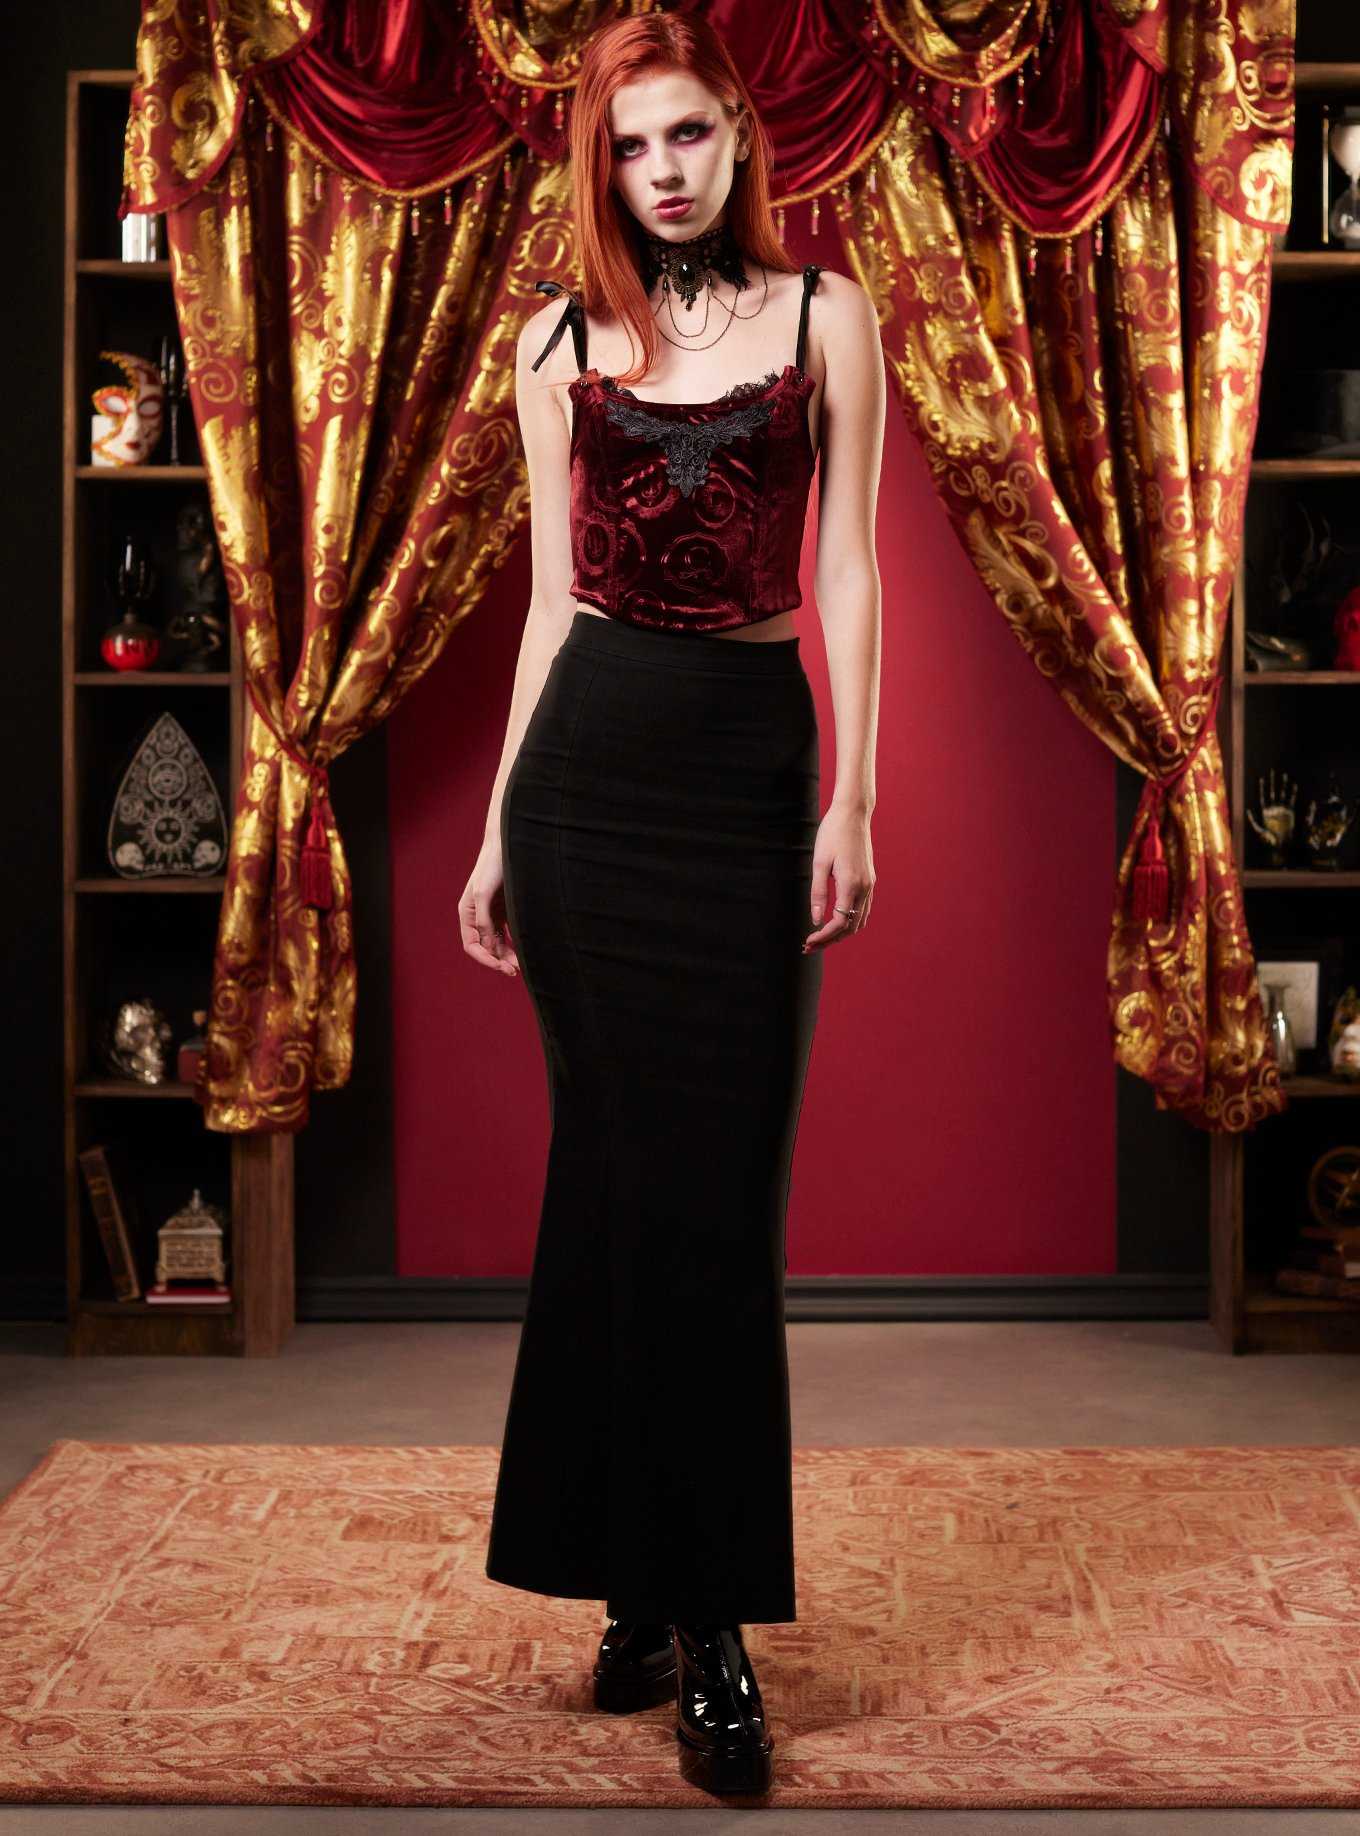 Interview With The Vampire Velvet Lace Girls Corset Plus Size